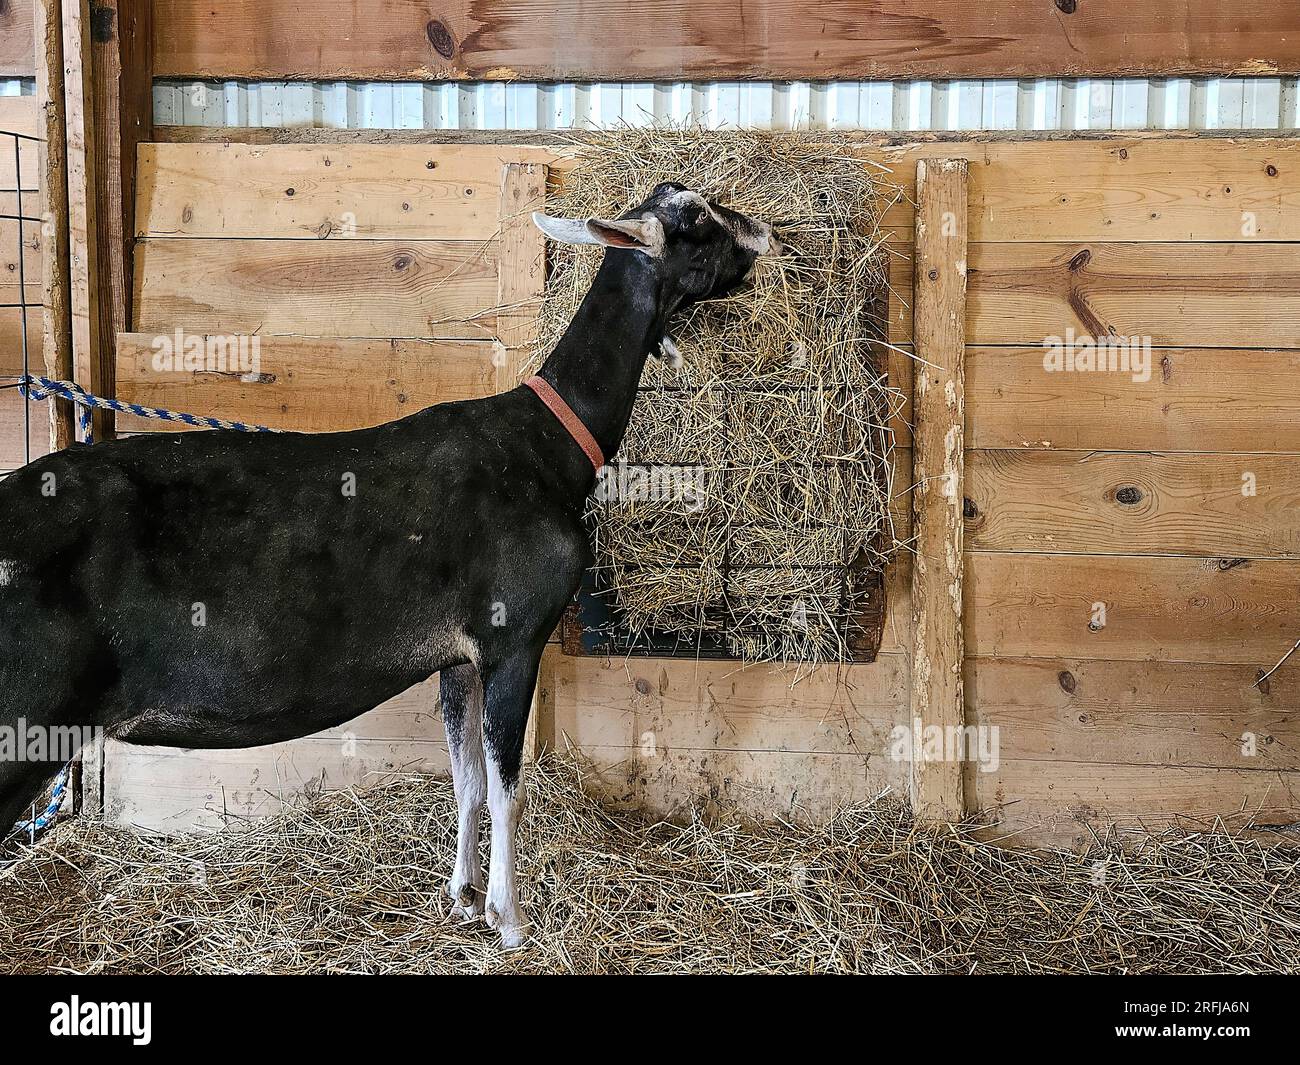 Black and white goat eating hay on wooden barn stall wall Stock Photo